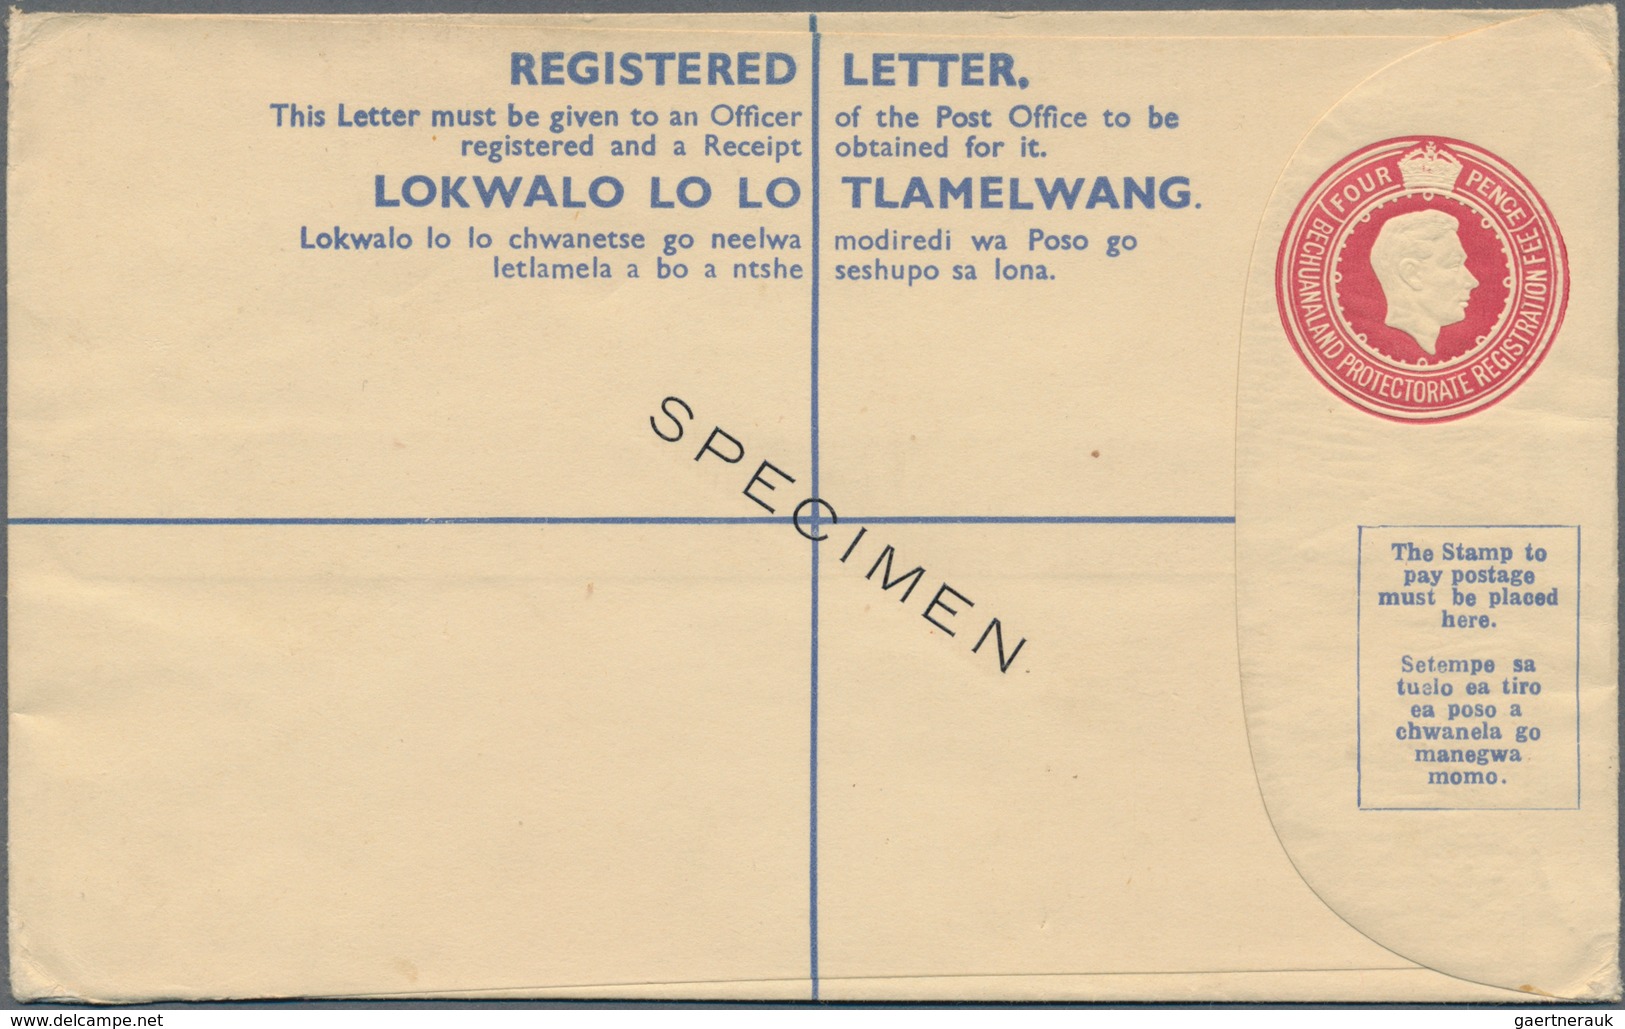 Betschuanaland: 1905/62 holding of ca. 610 exclusively unused postal stationary, while cards, regist